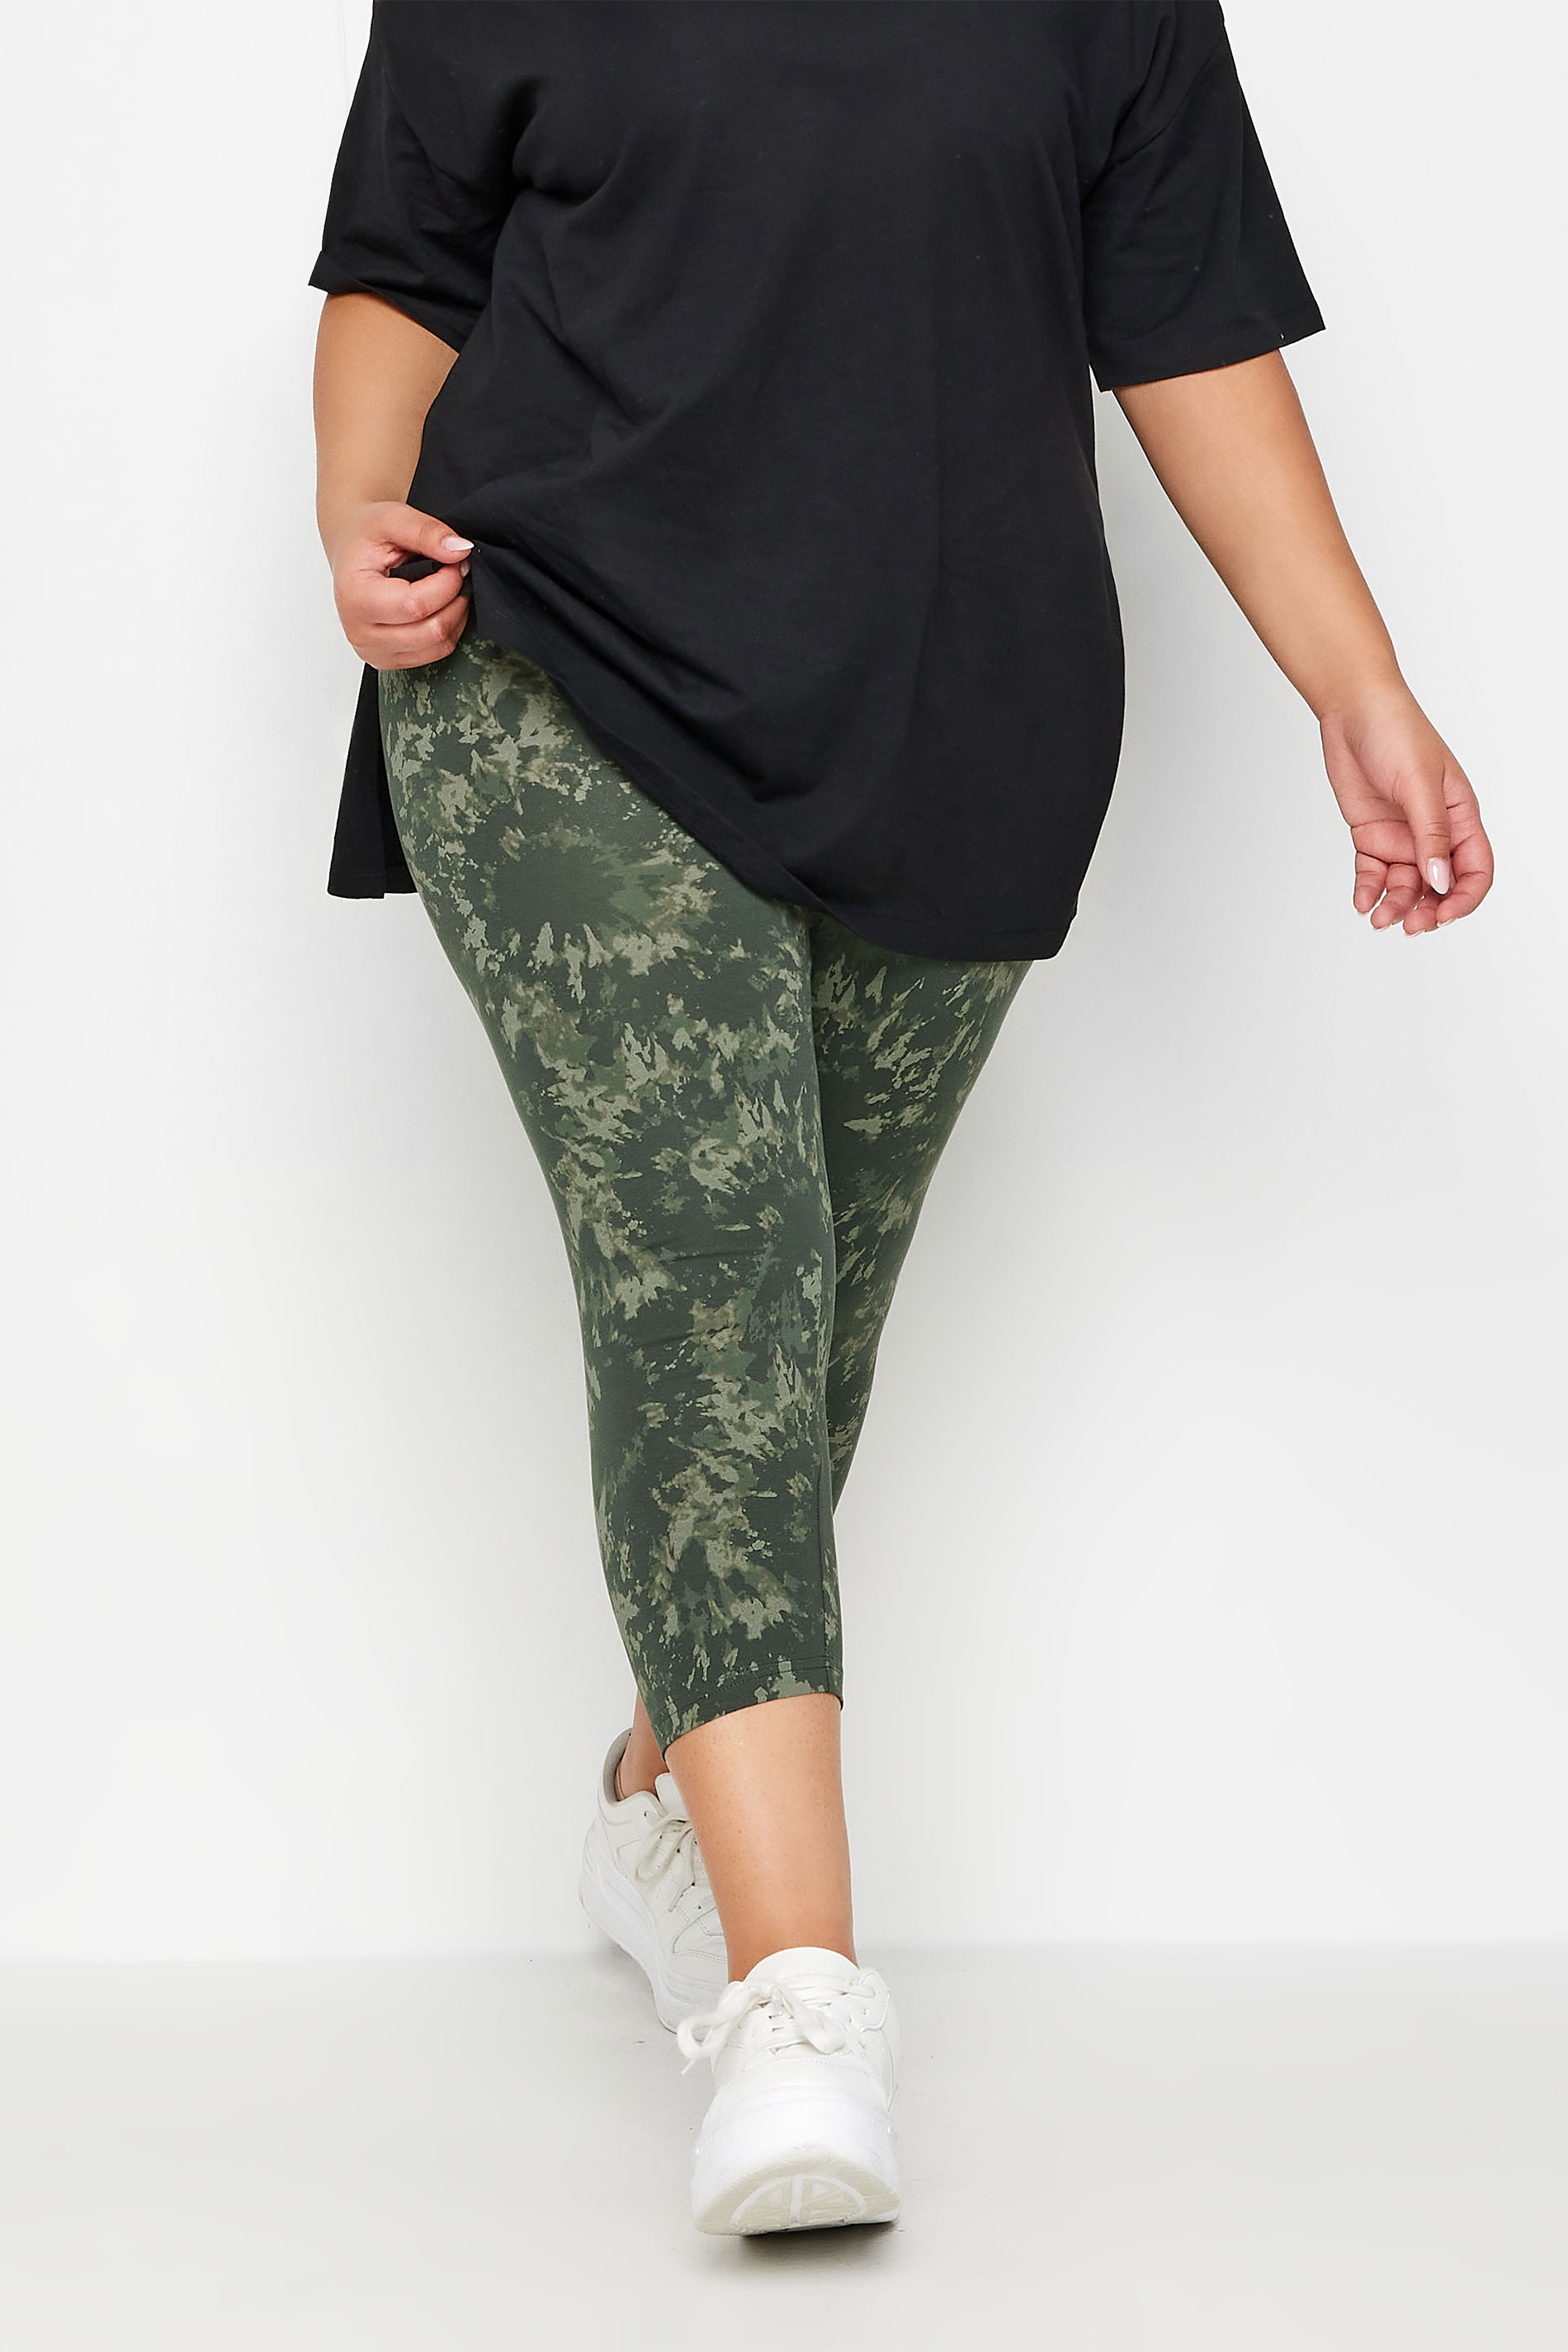 YOURS Plus Size 2 PACK Black & Khaki Green Tie Dye Cropped Leggings | Yours Clothing 2